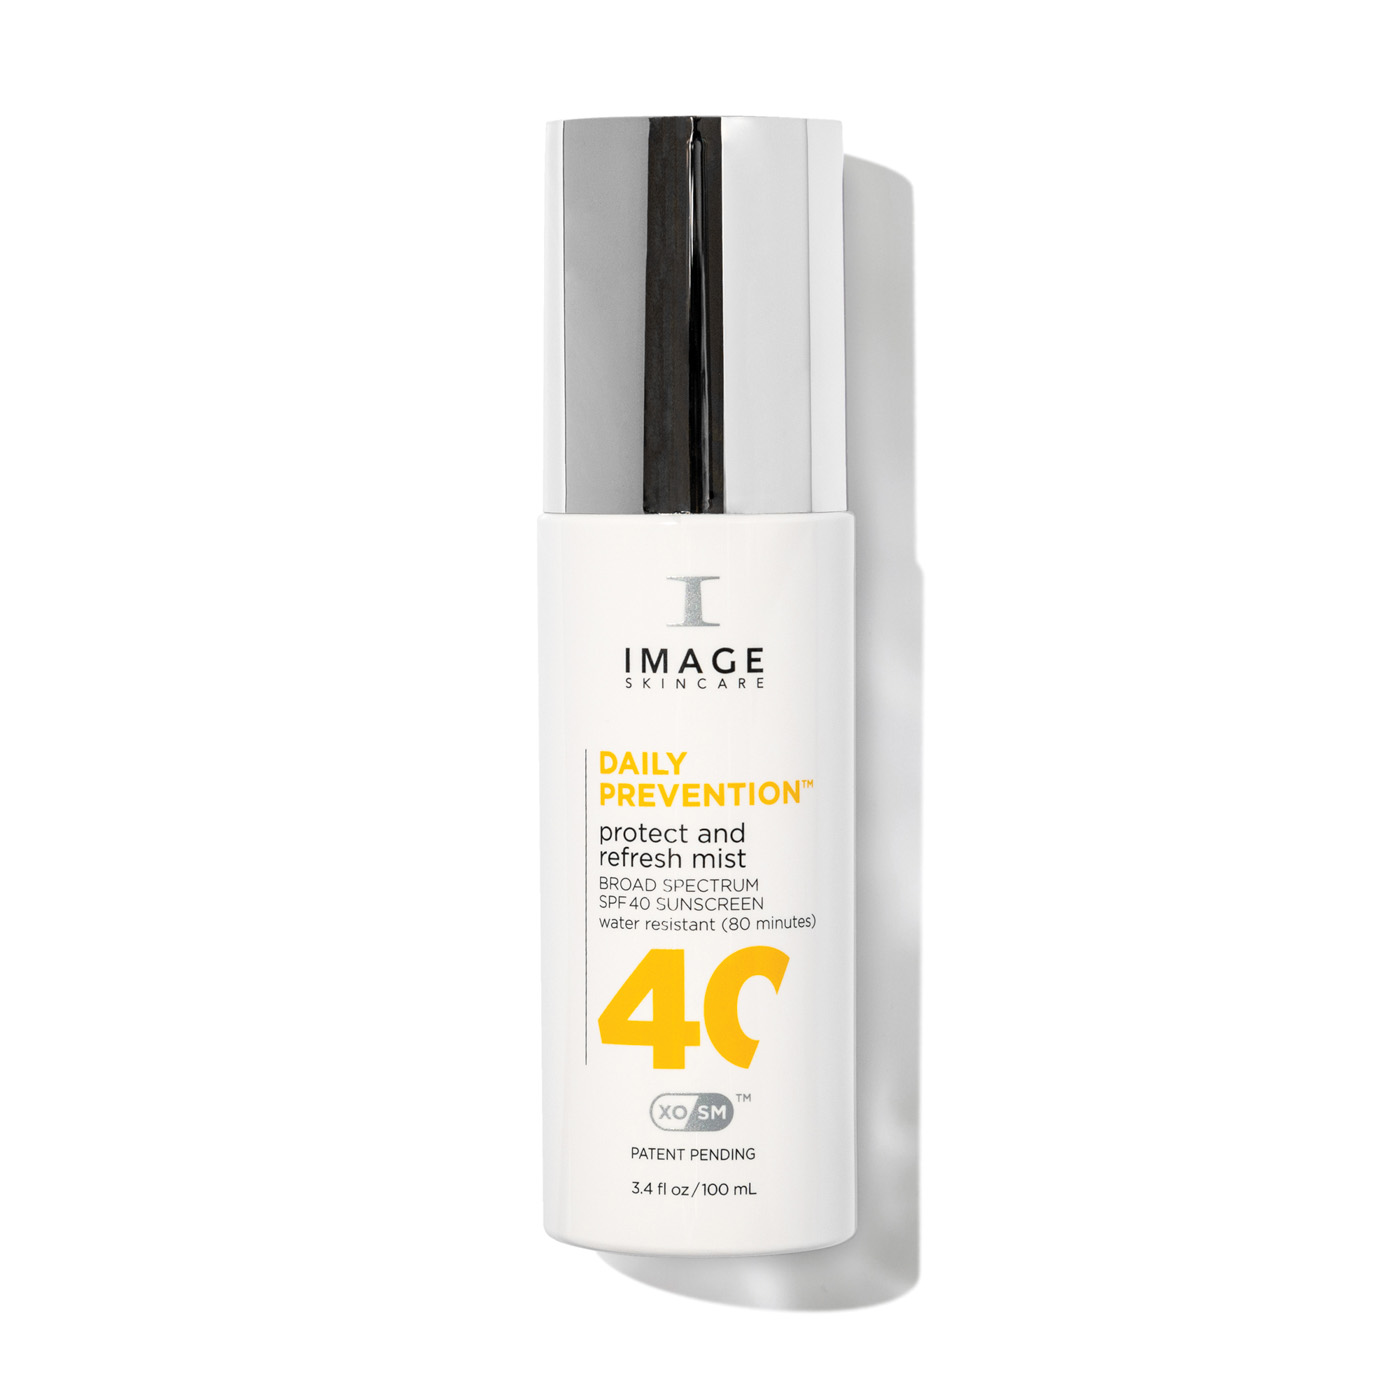 26 Image Skincare, Daily Prevention Protect And Refresh Mist Spf 40, Imageskincare.com